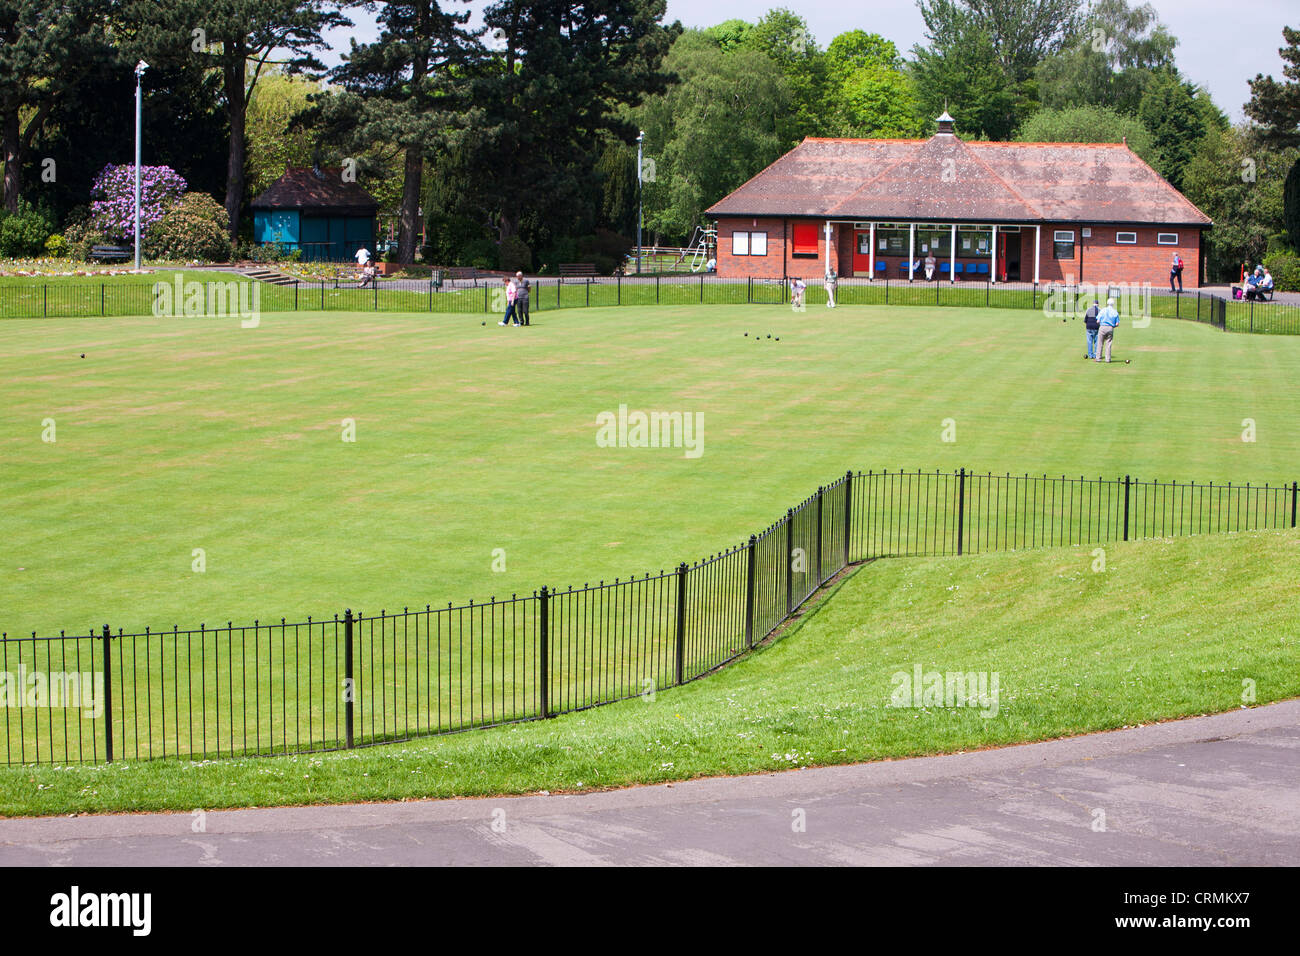 The Crown green bowling green in West Park, Macclesfield, Cheshire, UK. Stock Photo